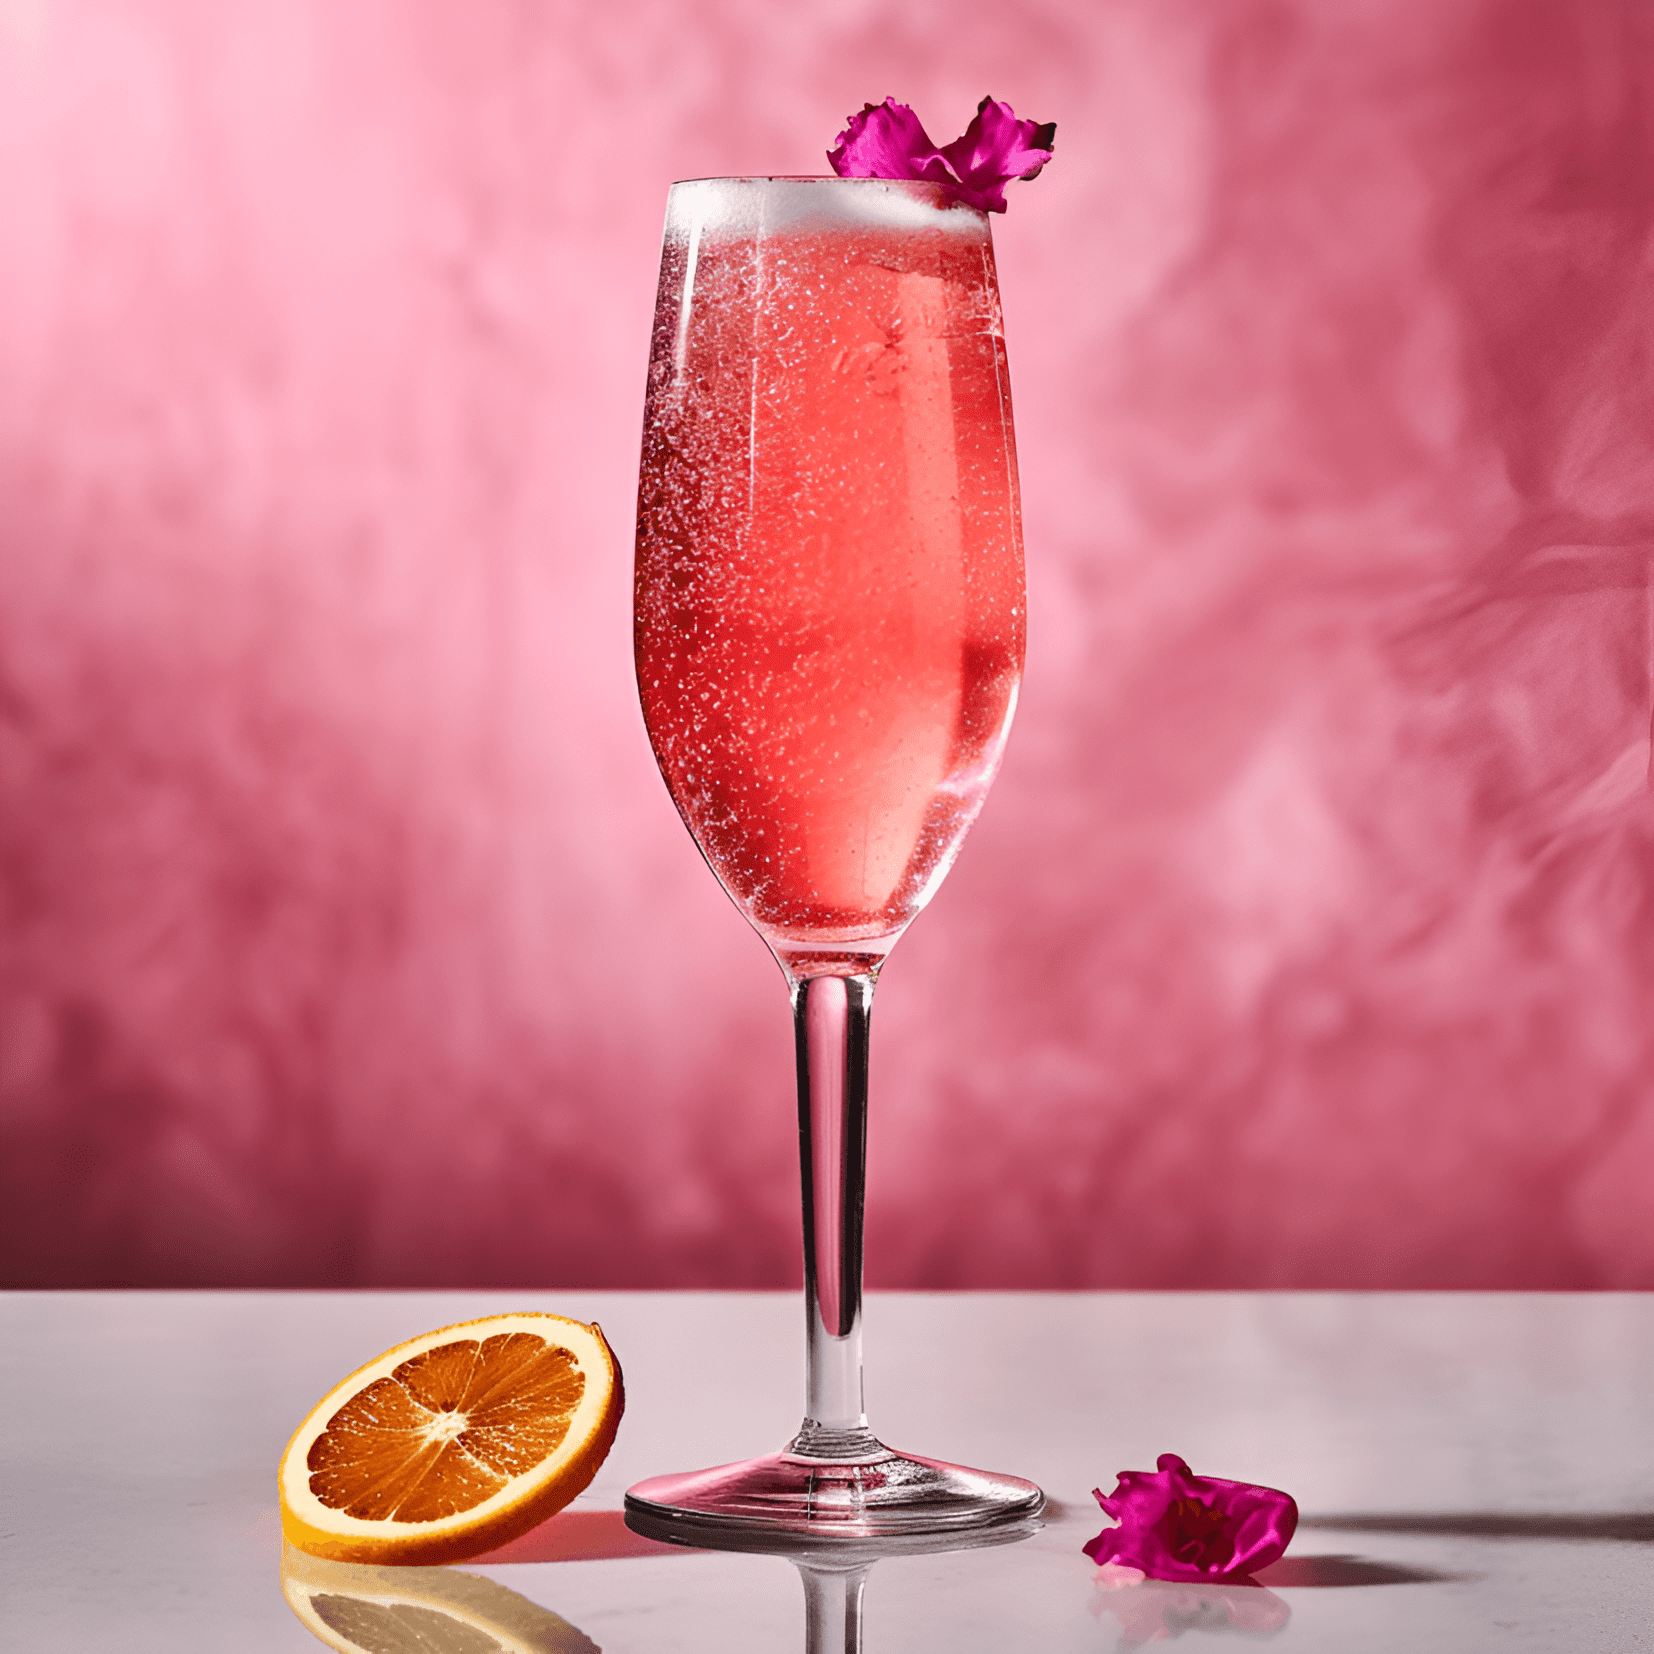 Rose Kennedy Cocktail Recipe - The Rose Kennedy cocktail has a delicate balance of sweet and tart flavors. It is light, crisp, and refreshing, with a subtle hint of floral notes from the elderflower liqueur. The combination of vodka, cranberry juice, and lime juice creates a tangy and invigorating taste that is perfect for any occasion.